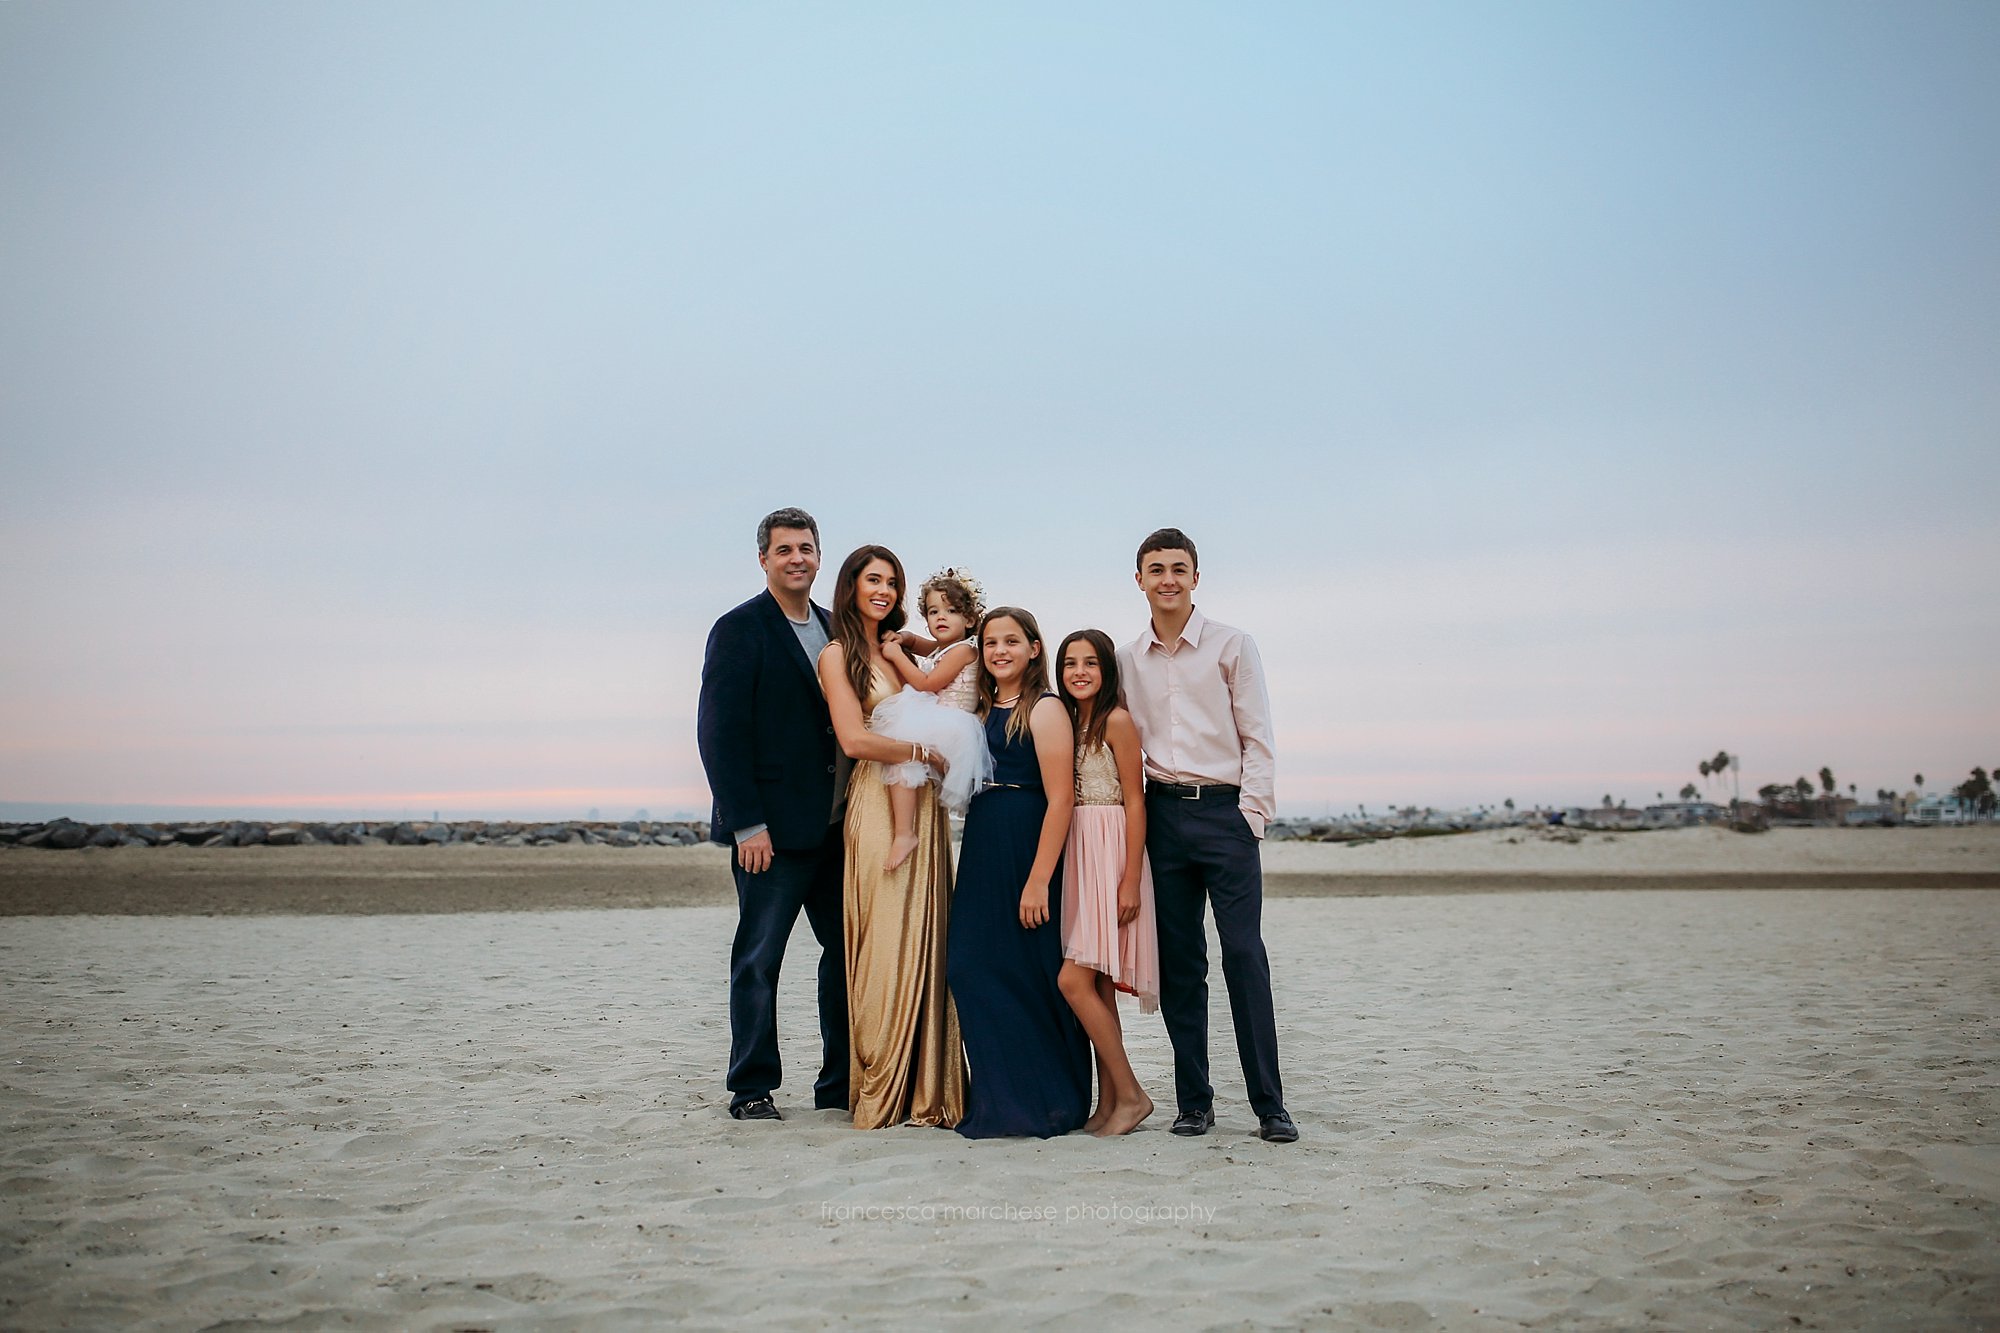 Francesca Marchese Photography - Family Photographer Starkman Family sunset beach session - family of 6 Guy and Elicia Starkman